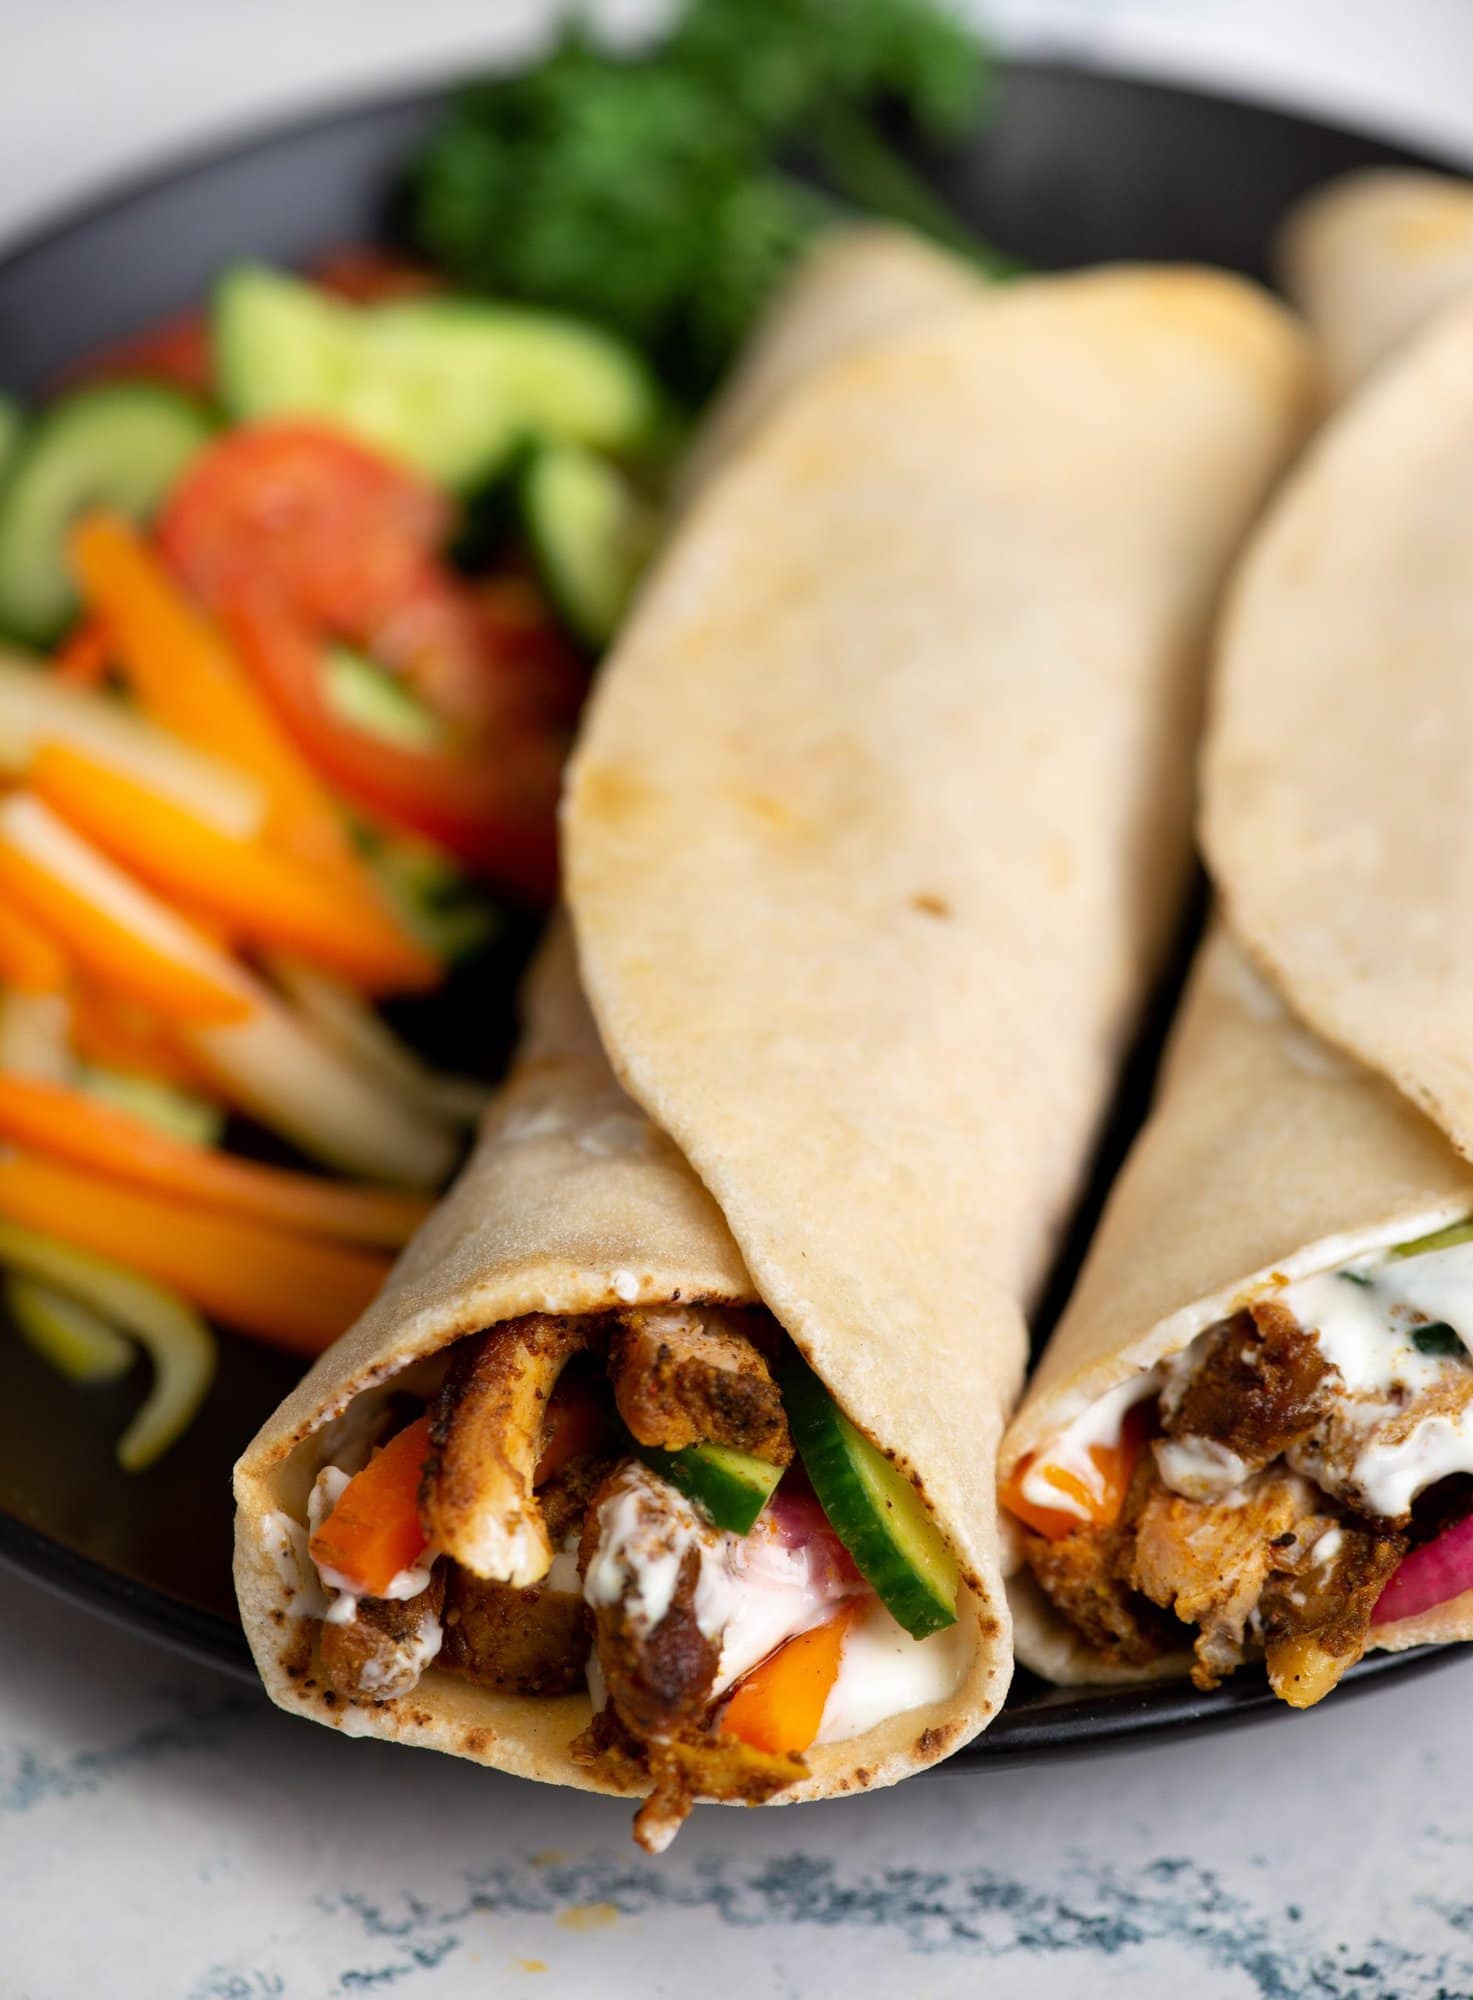 Cover pic of chicken shawarma showing couple of shawarma wrap beside chopped veggies on a black plate